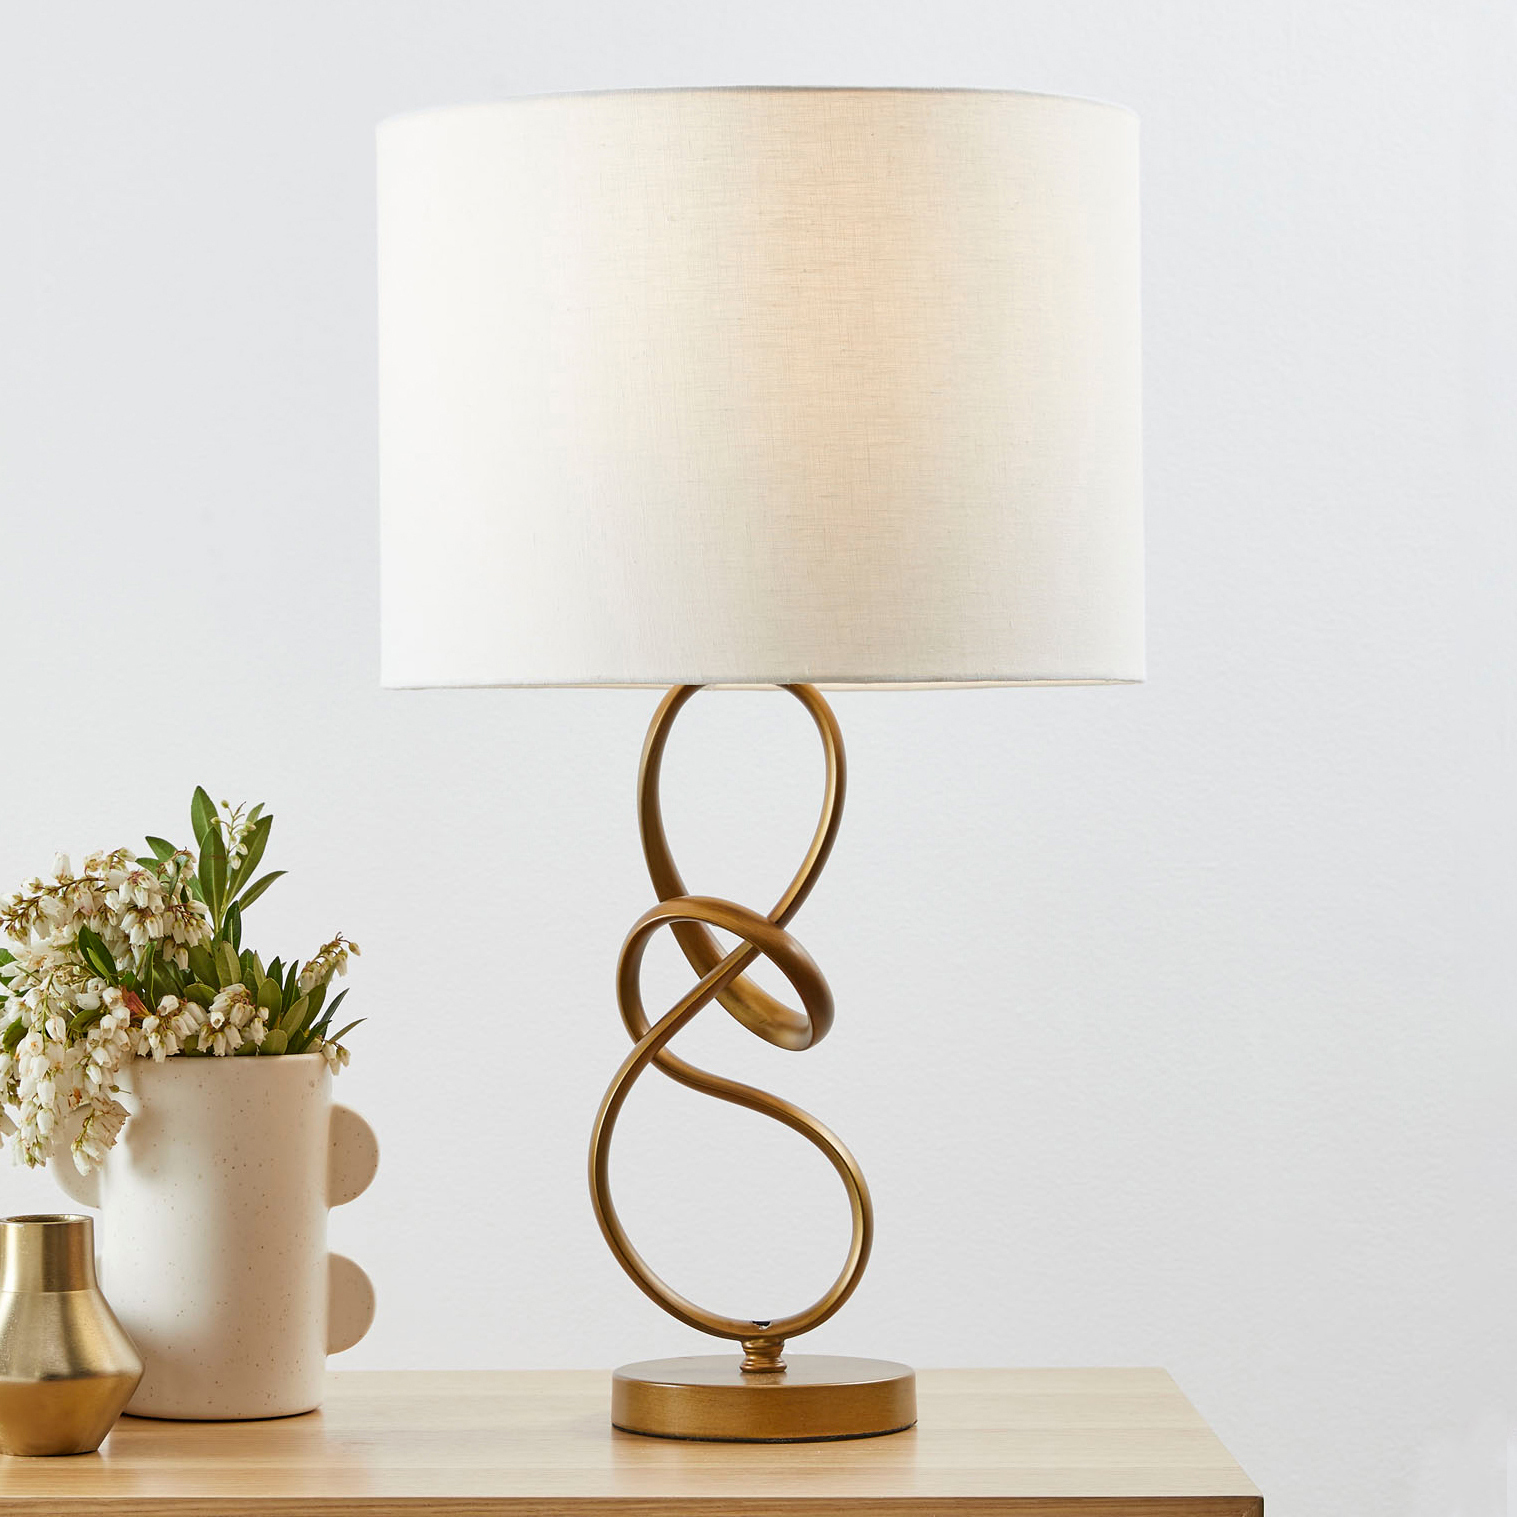 Temple Webster Knox Metal Table Lamp, How To Earth A Metal Table Lamp